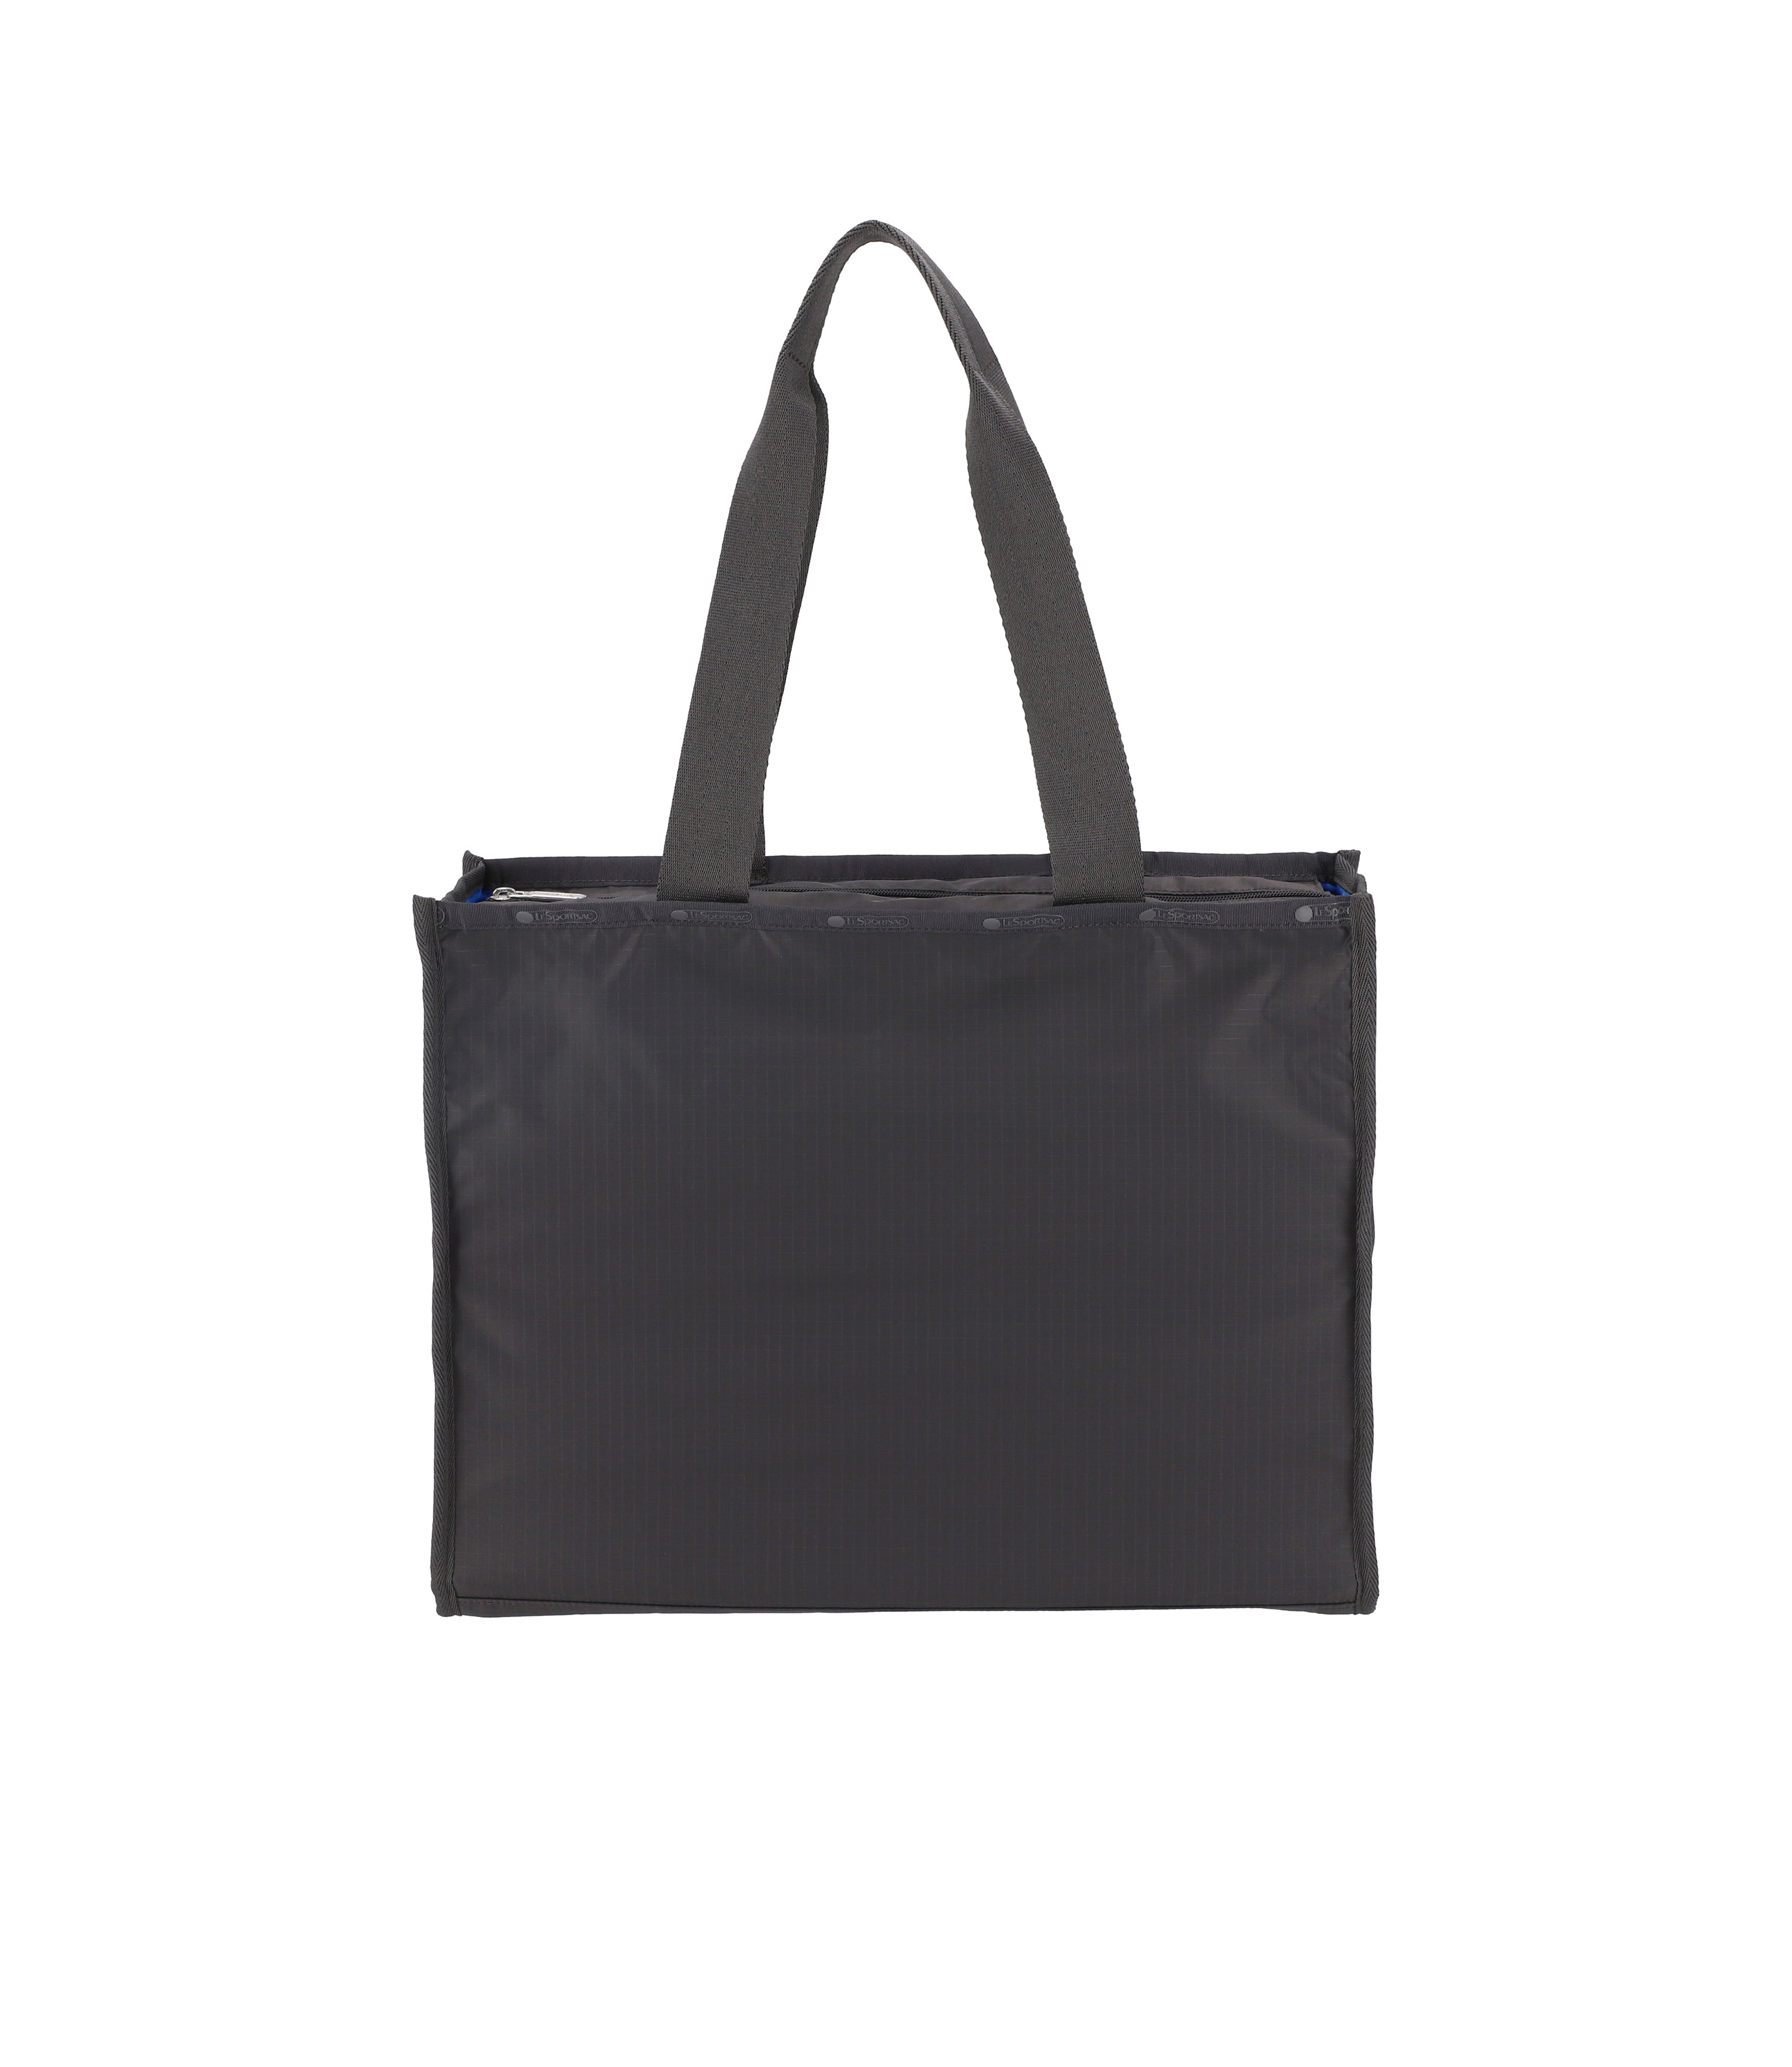 Lesportsac Emerald Tote with Stones